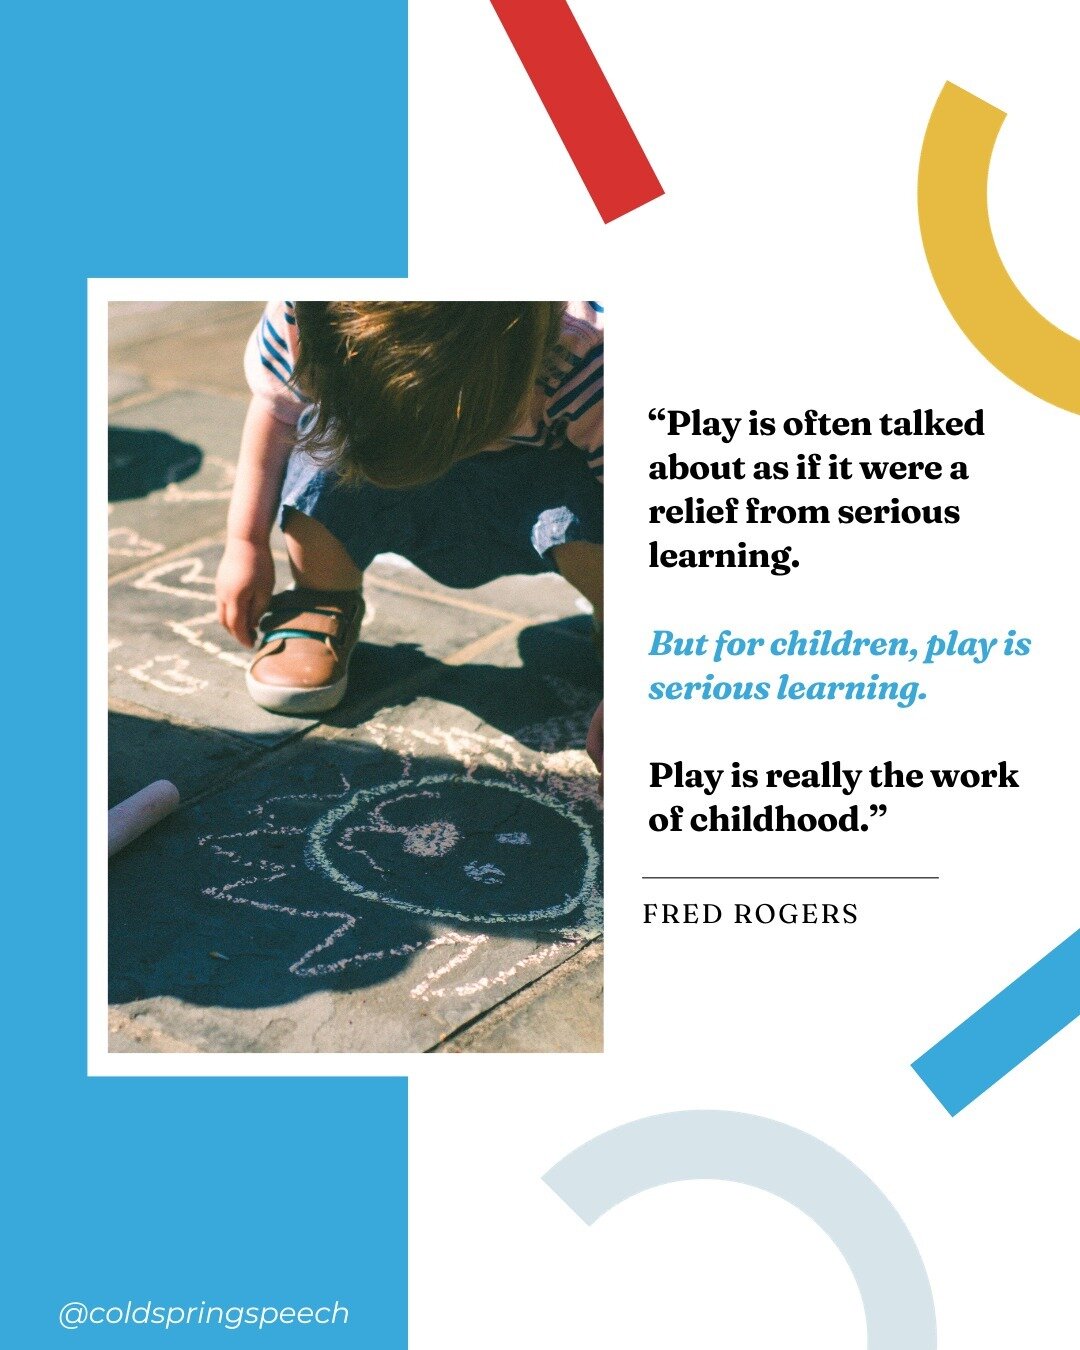 Mr. Rogers understood the essence of childhood like no other. He knew that play isn't just fun; it is an essential part of a child's growth.

Play shouldn't be just a reward for hard work; it should be an integral part of the journey! In a world wher